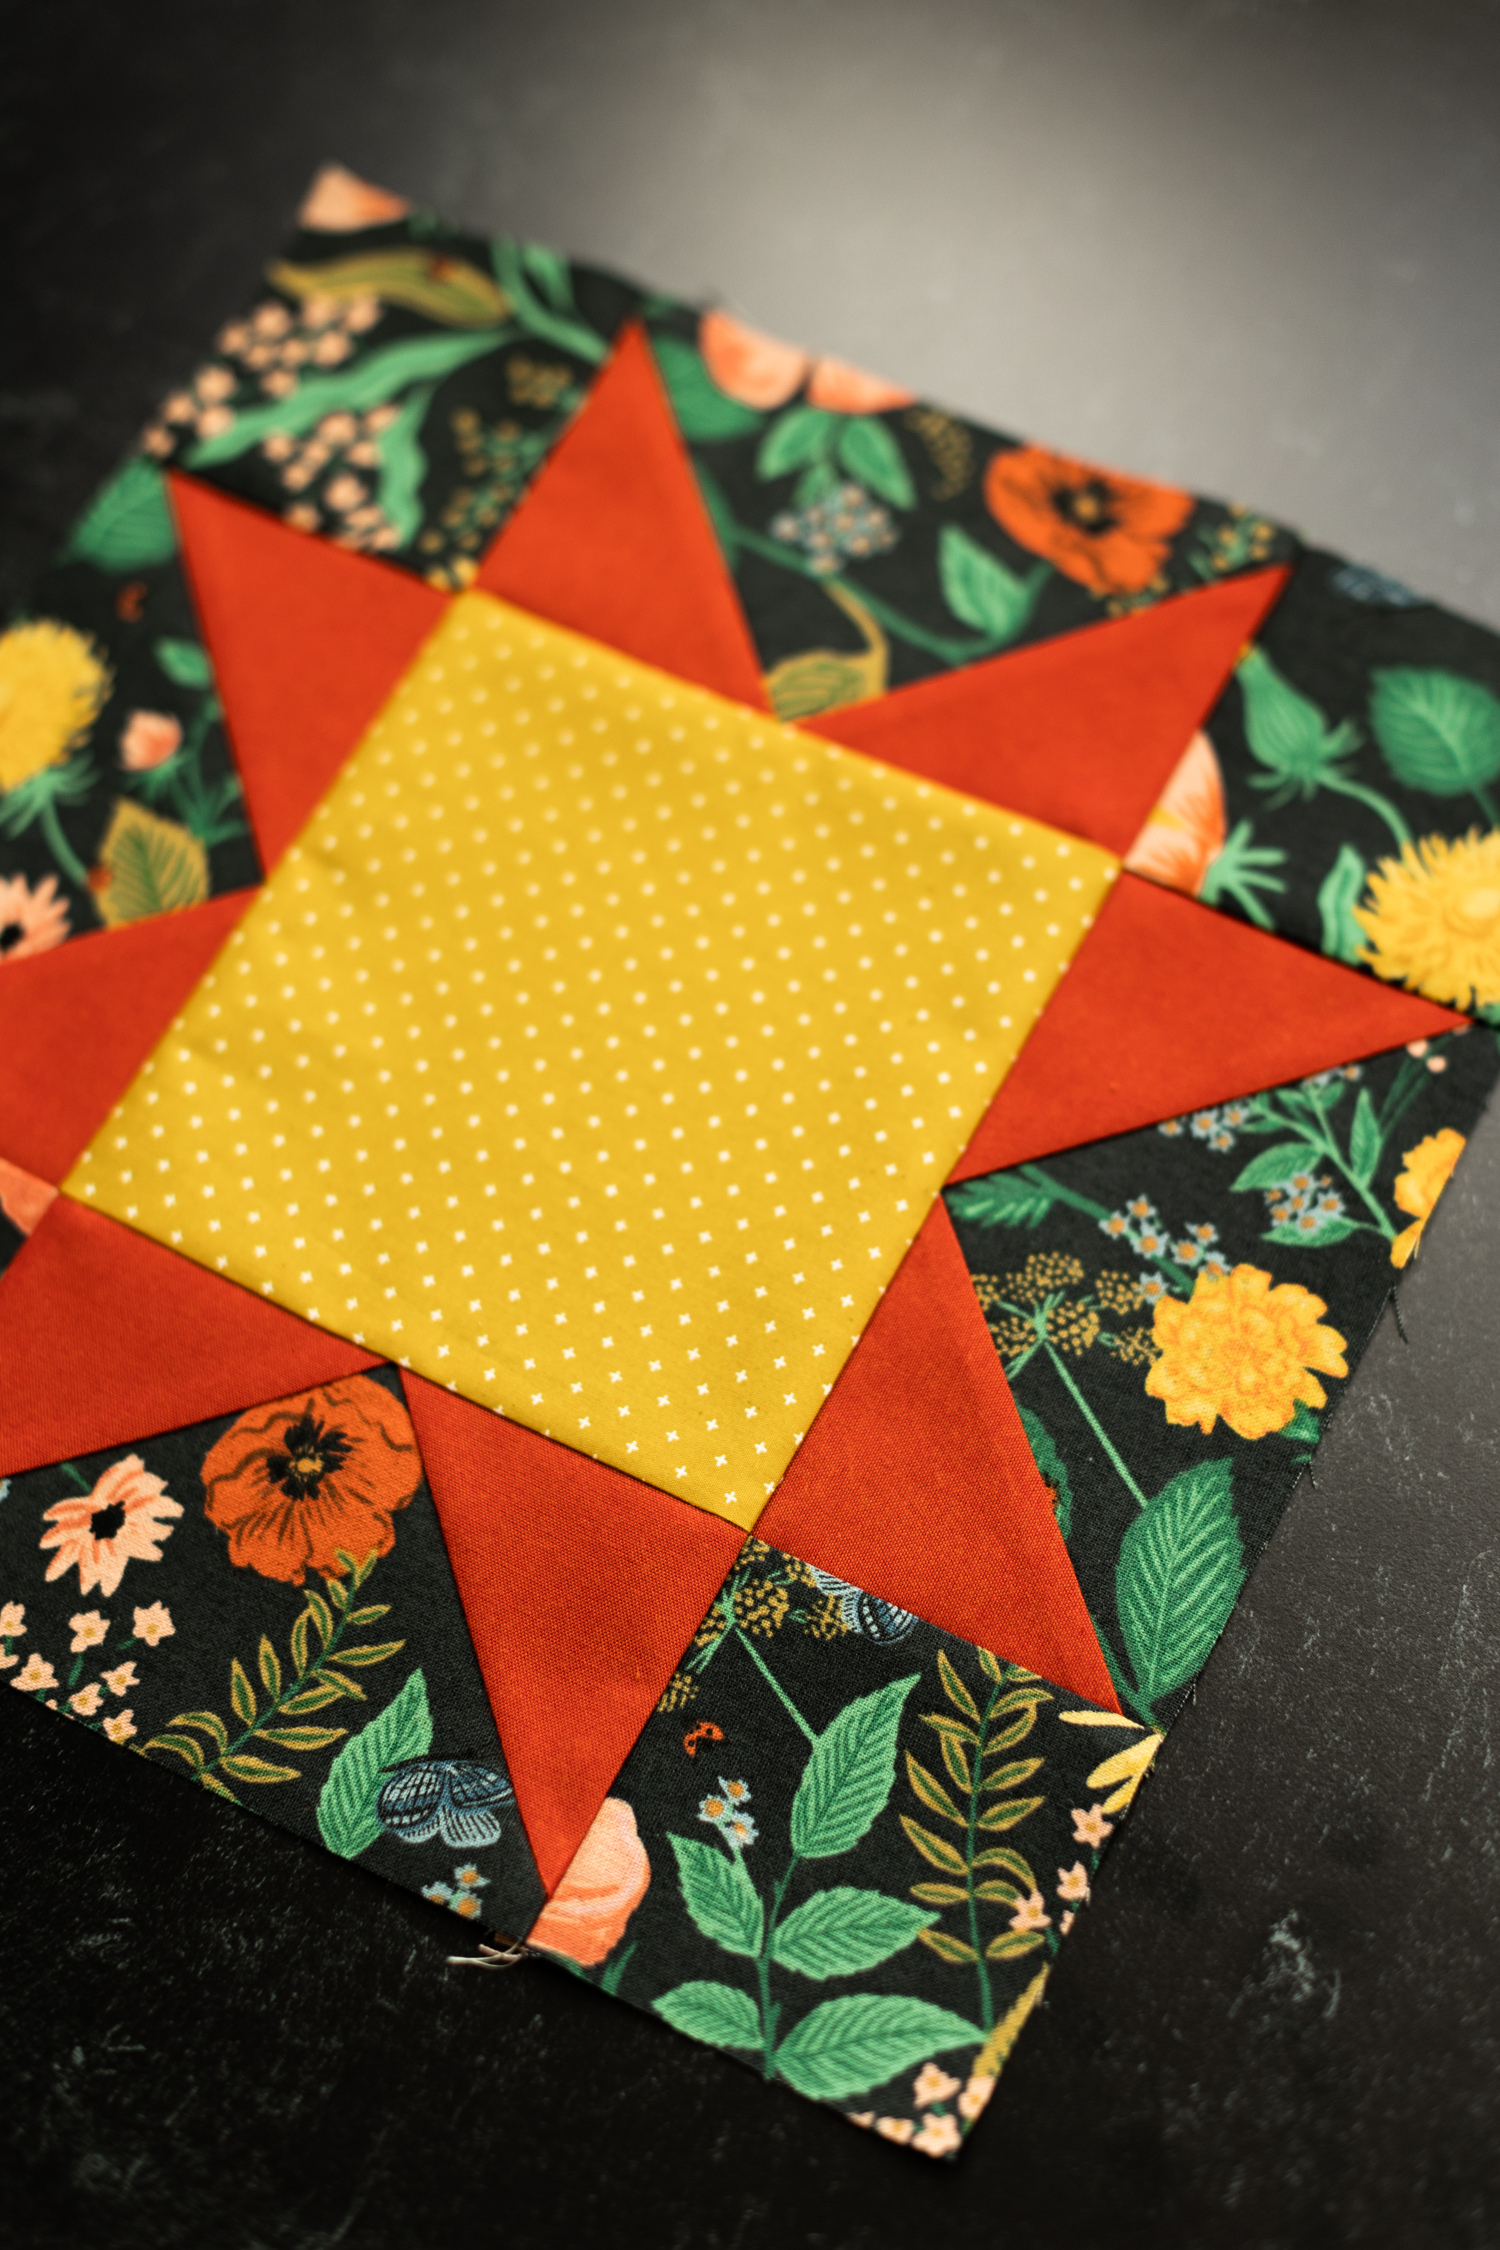 This DIY Patchwork Storage Cube Tutorial walks you through the steps of sewing a storage bin featuring a sawtooth star block